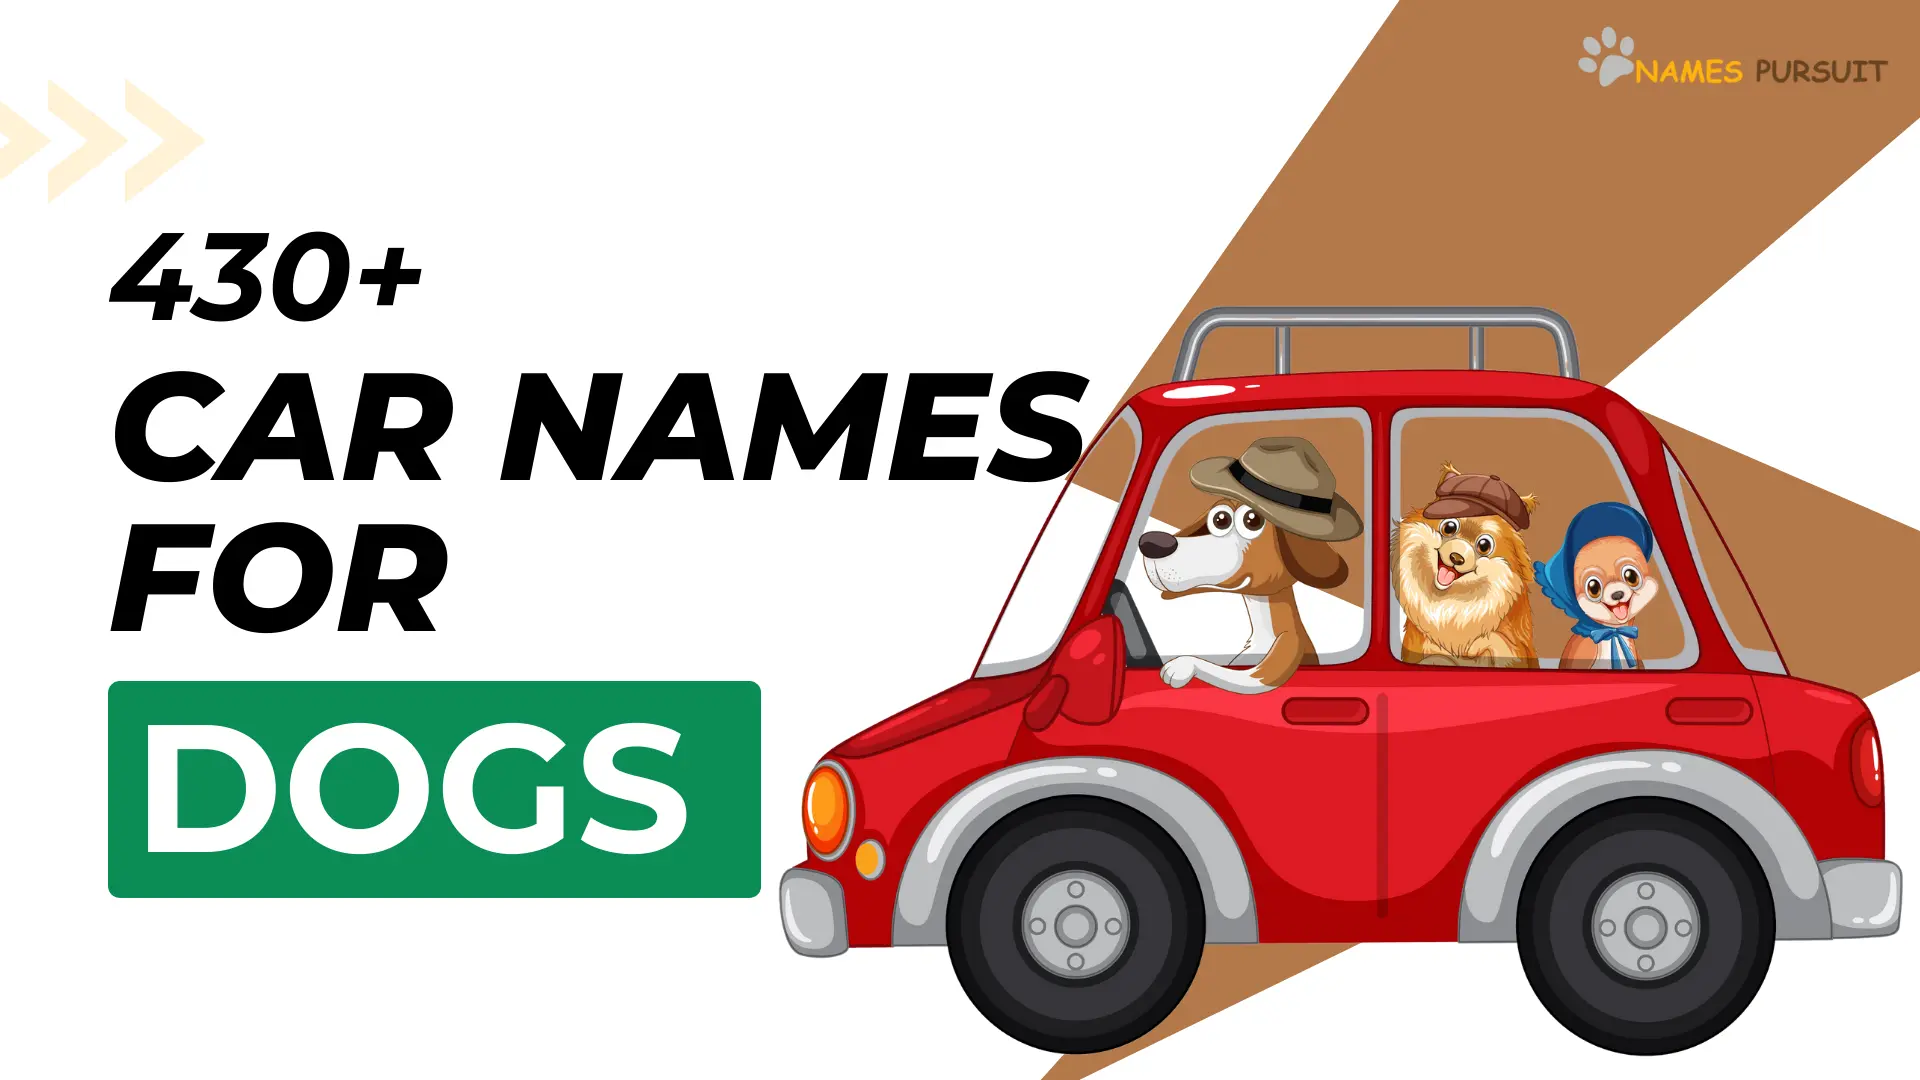 Car Names for Dogs